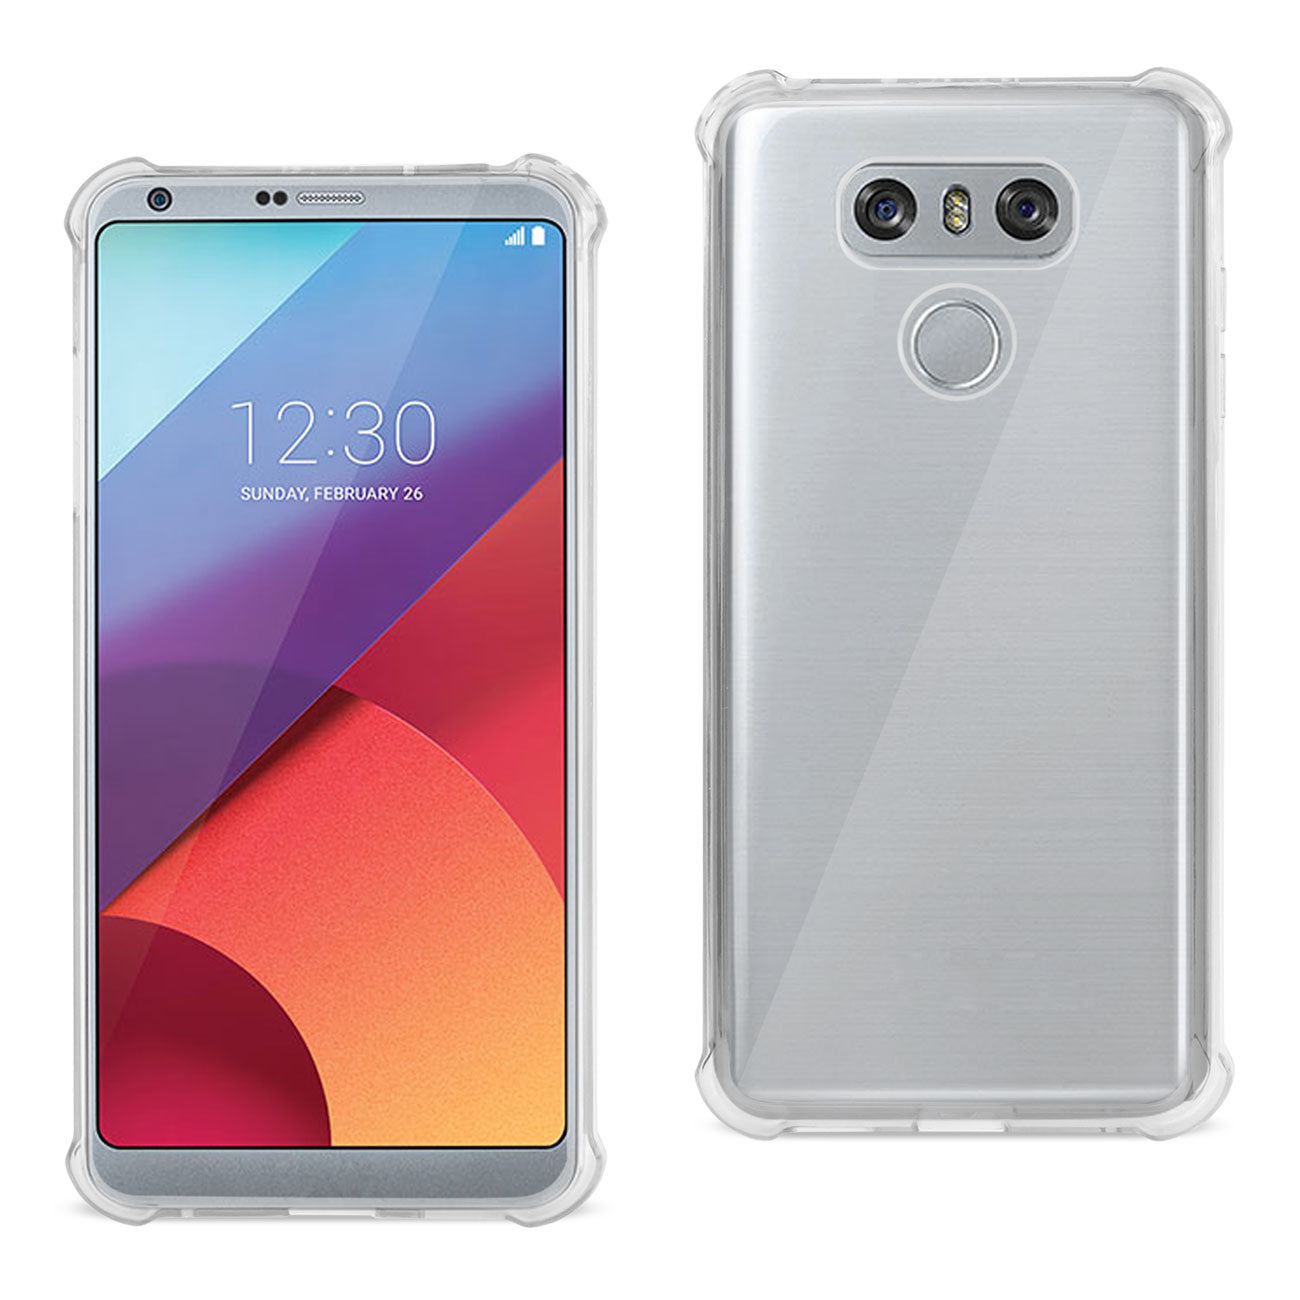 LG G6 Clear Bumper Case With Air Cushion Shock Absorption In Clear